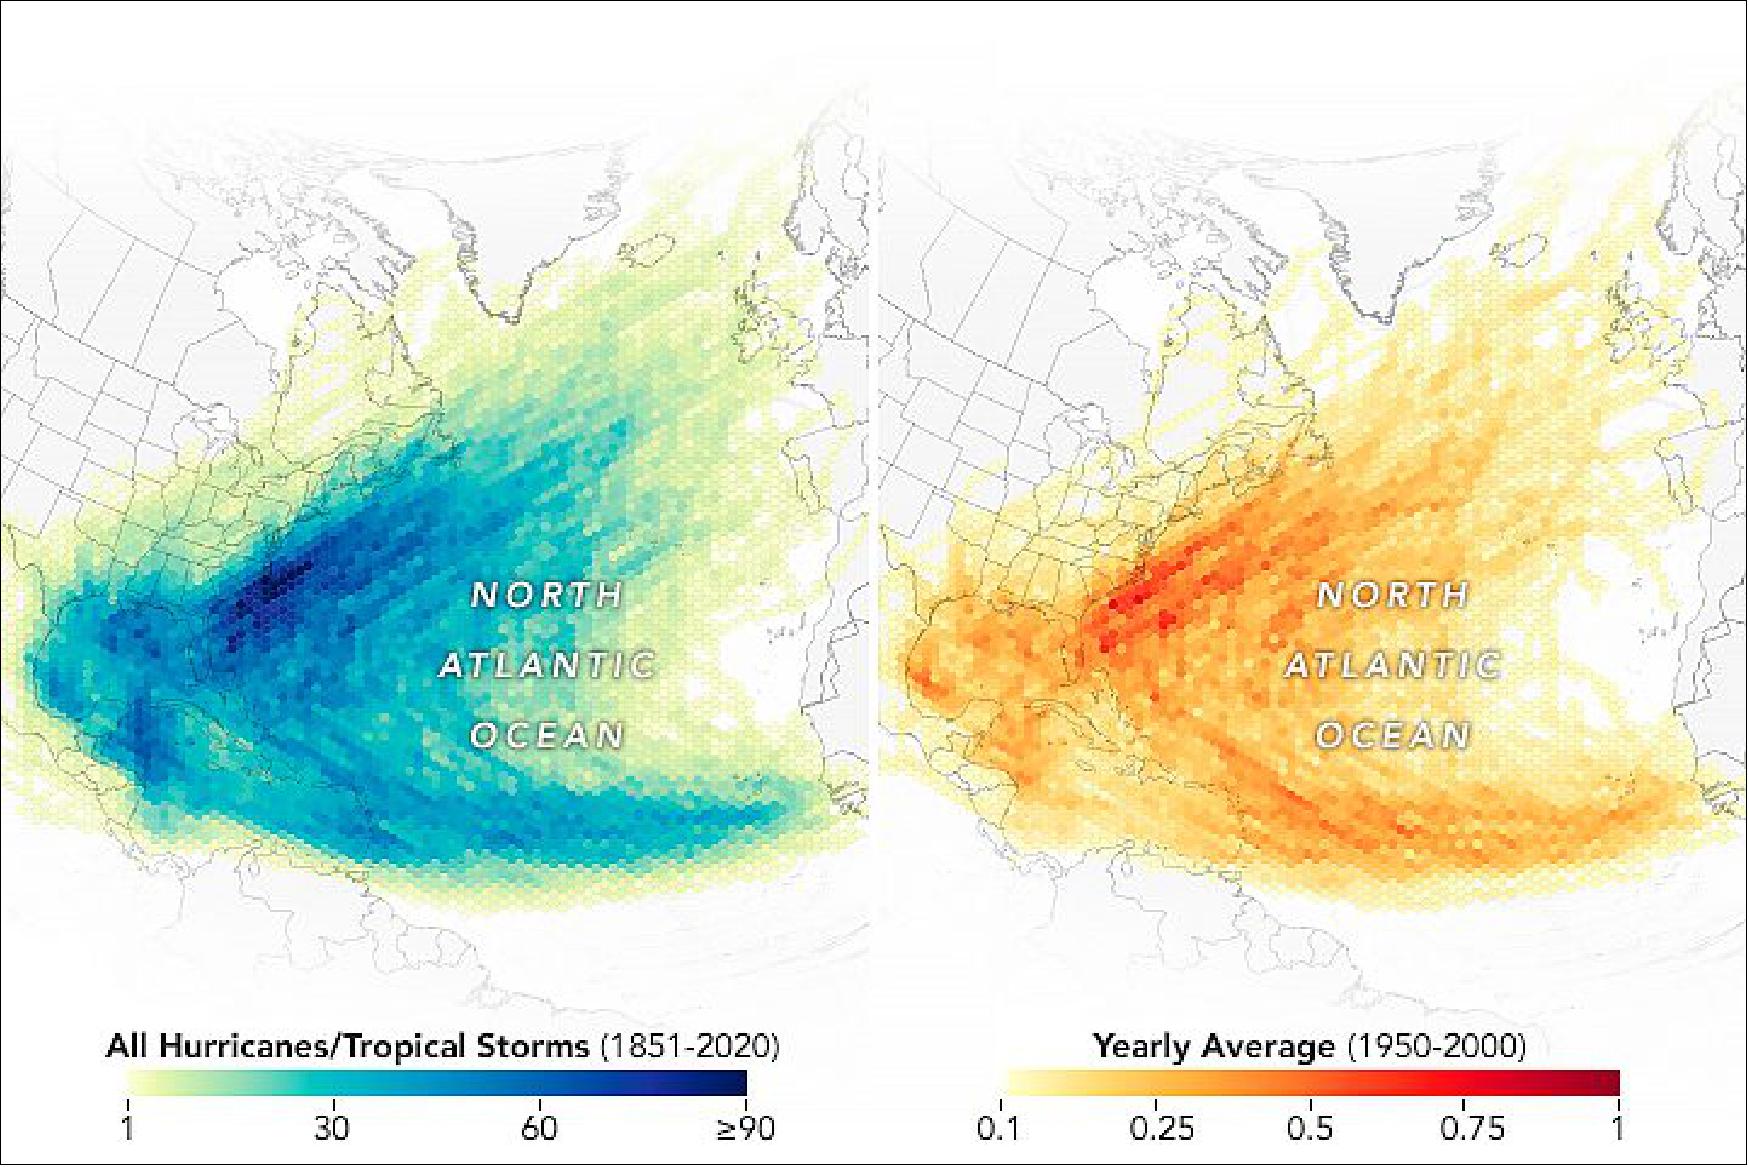 Figure 41: These maps show historical storm tracks in the Atlantic basin, with each hexagon having a 100 km (60-mile) diameter. The map on the left shows the total number of storms that crossed through each 100-kilometer parcel from 1851 to 2020. The map on the right shows the average number of storms that passed through each hexagon between 1950 and 2000. While the yearly average frequency barely approached one storm for any given parcel from 1950-2000, the active season of 2020 brought as many as four storms to some of these areas (image credit: NASA Earth Observatory)